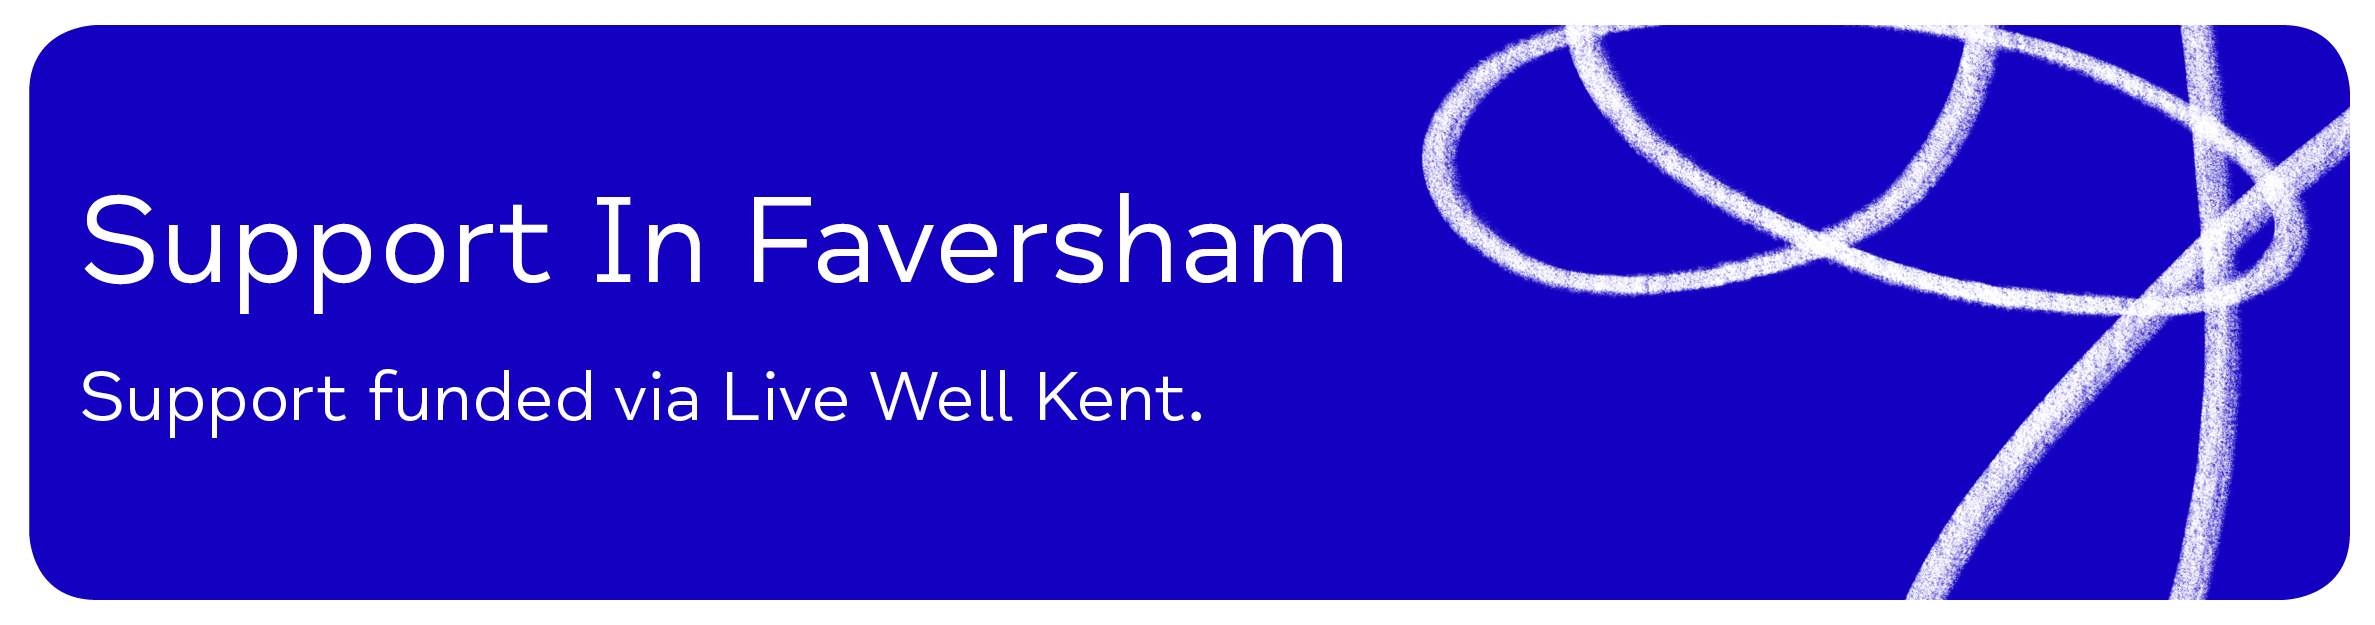 Support In Faversham. Support funded by Live Well Kent.